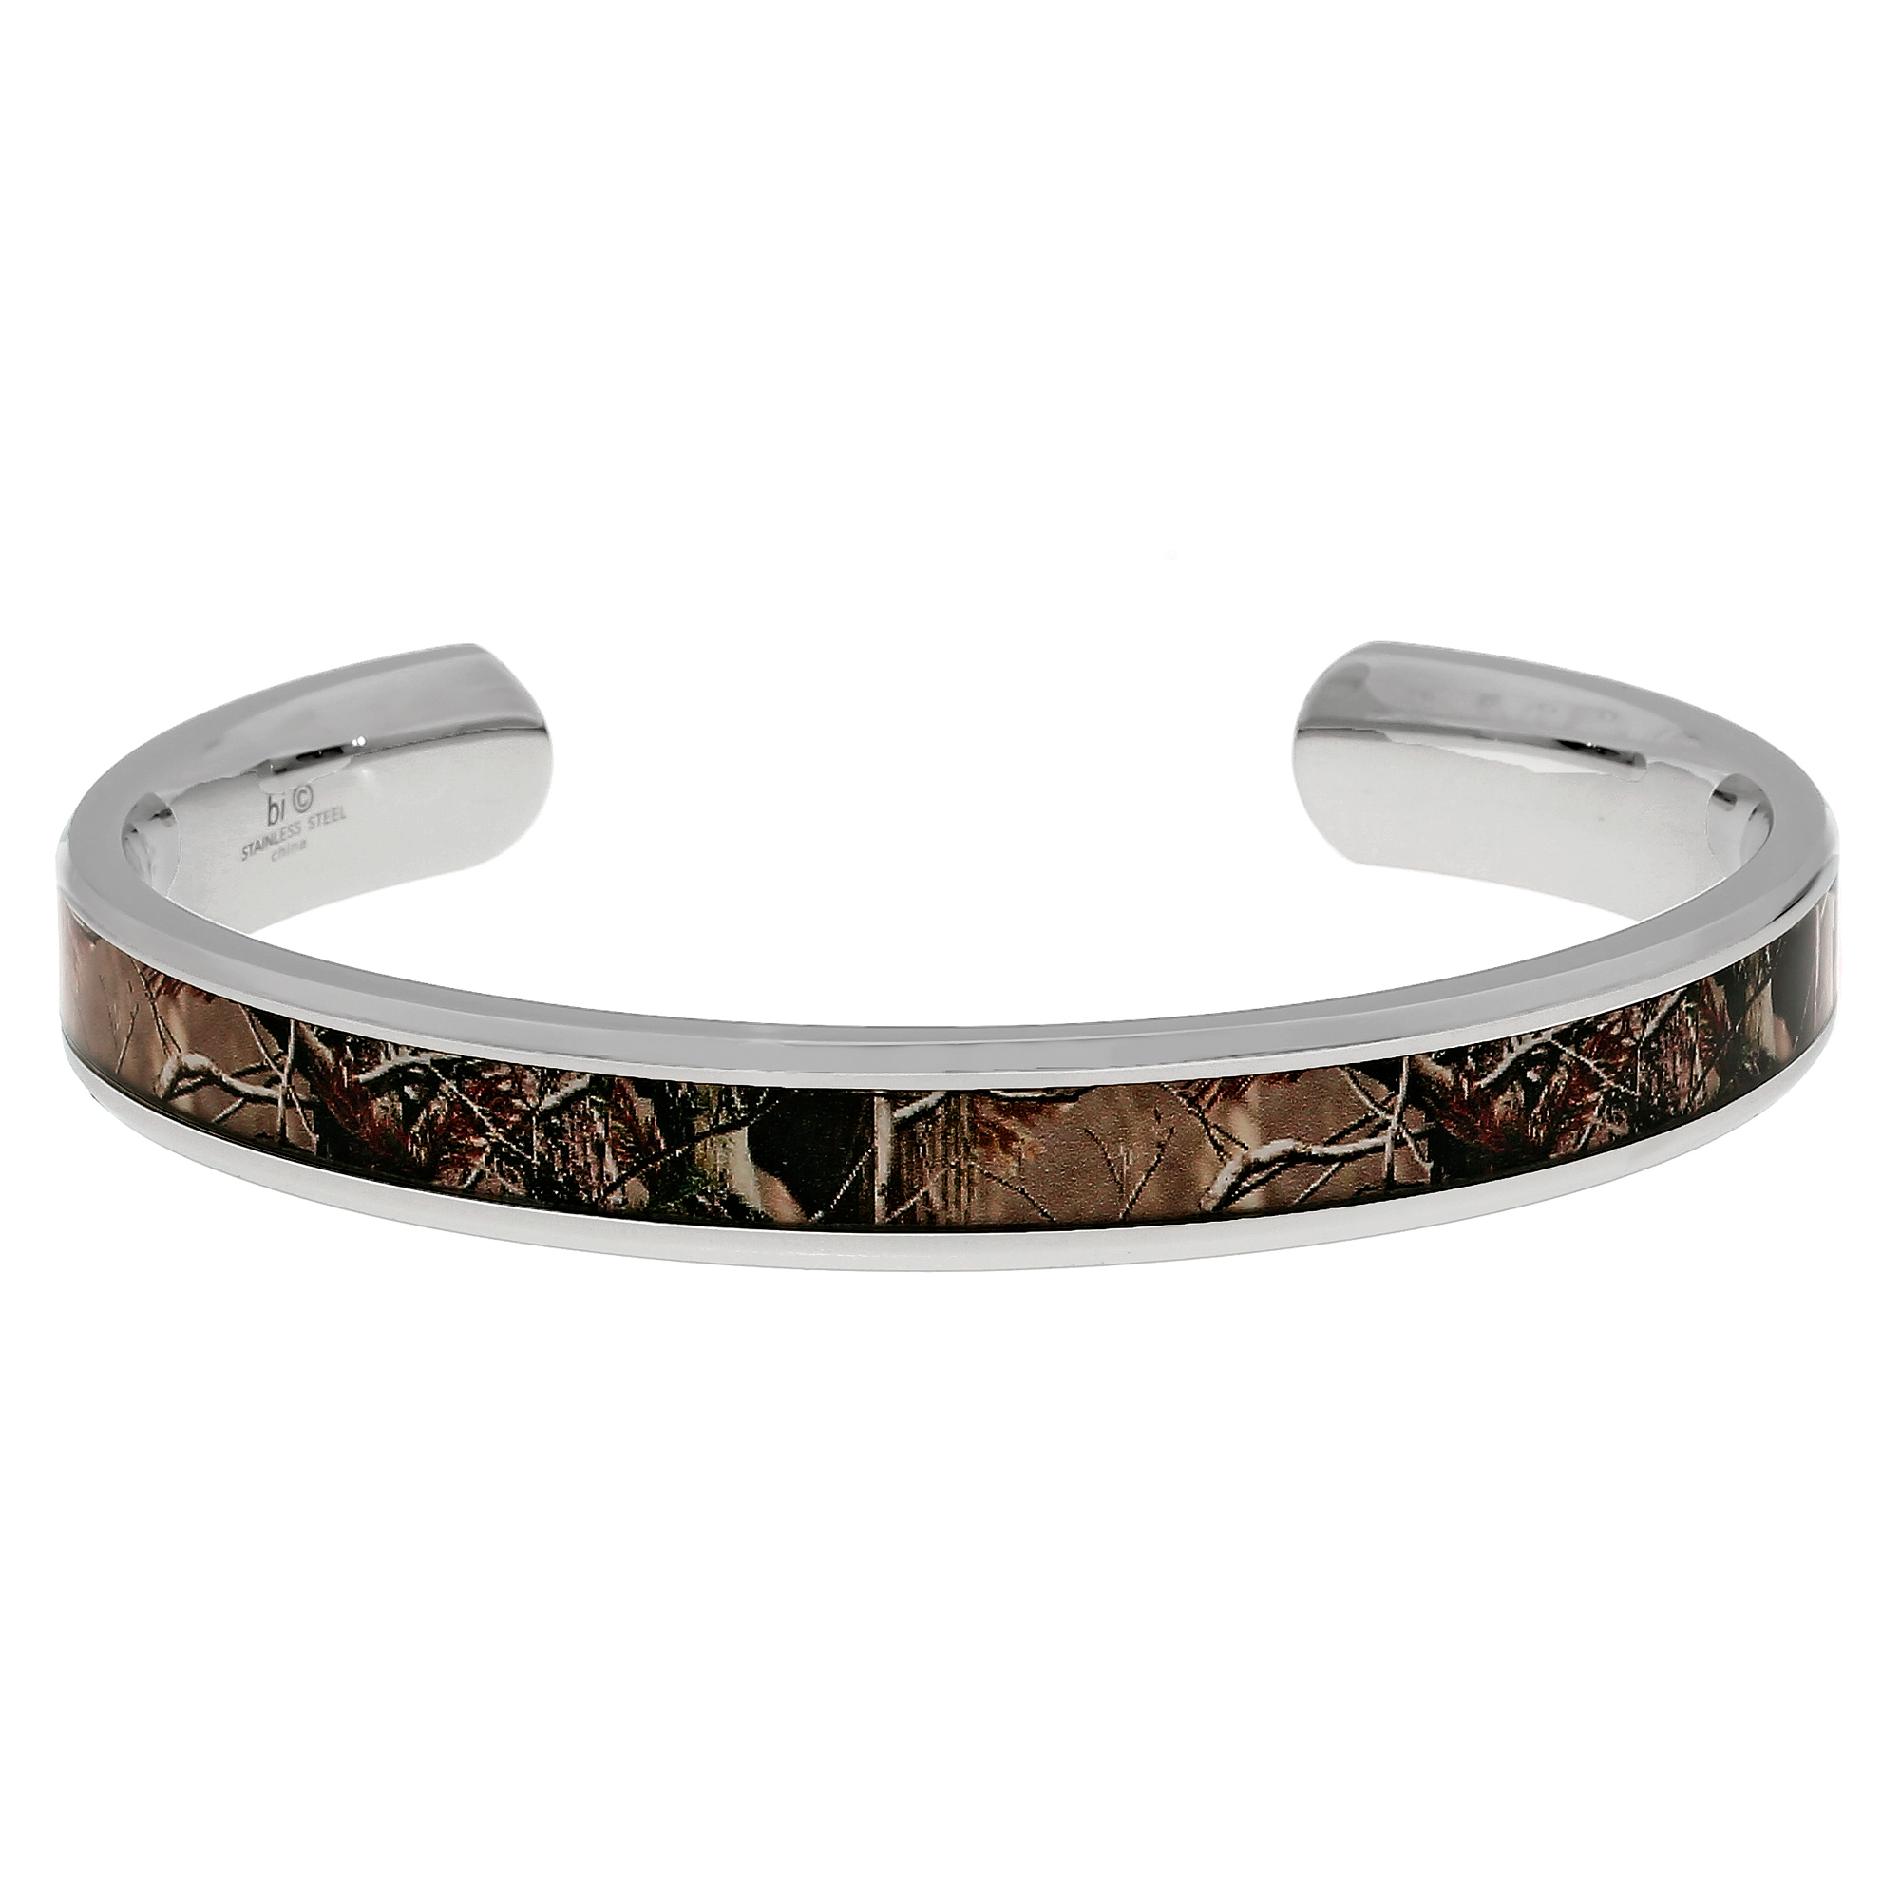 Stainless Steel Cuff Bangle with Camouflage Accent